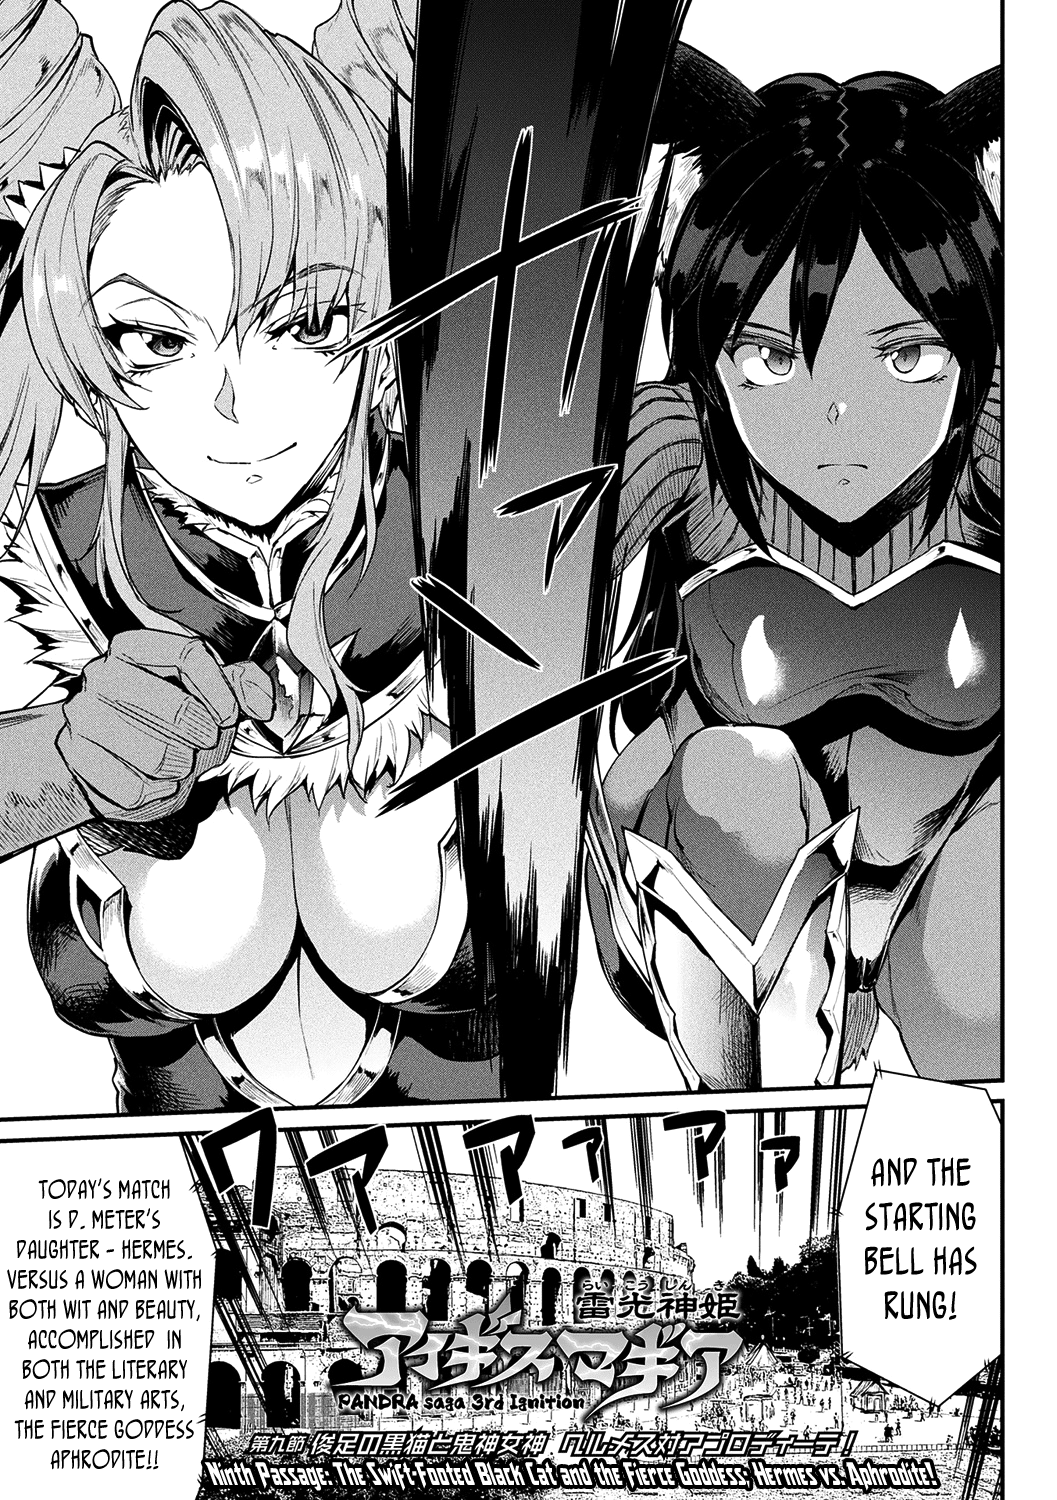 Raikou Shinki Igis Magia -Pandra Saga 3Rd Ignition Vol.2 Chapter 9: Ninth Passage: The Swift-Footed Black Cat And The Fierce Goddess; Hermes Vs. Aphrodite! - Picture 1